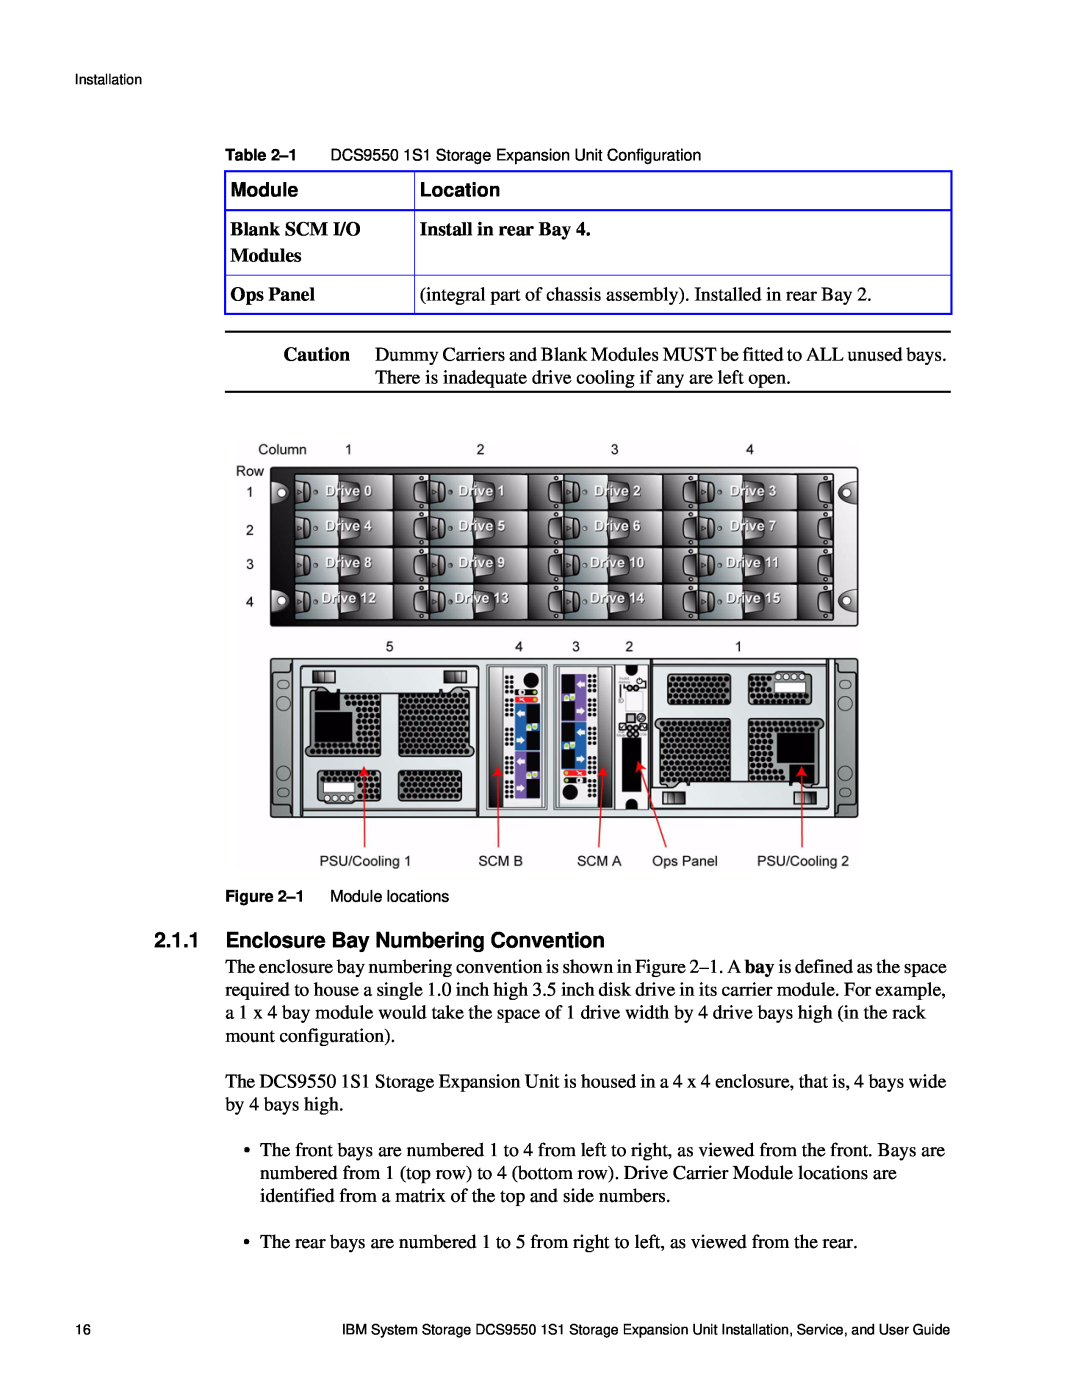 IBM DCS9550 1S1 manual Enclosure Bay Numbering Convention, Blank SCM I/O, Install in rear Bay, Modules, Ops Panel, Location 